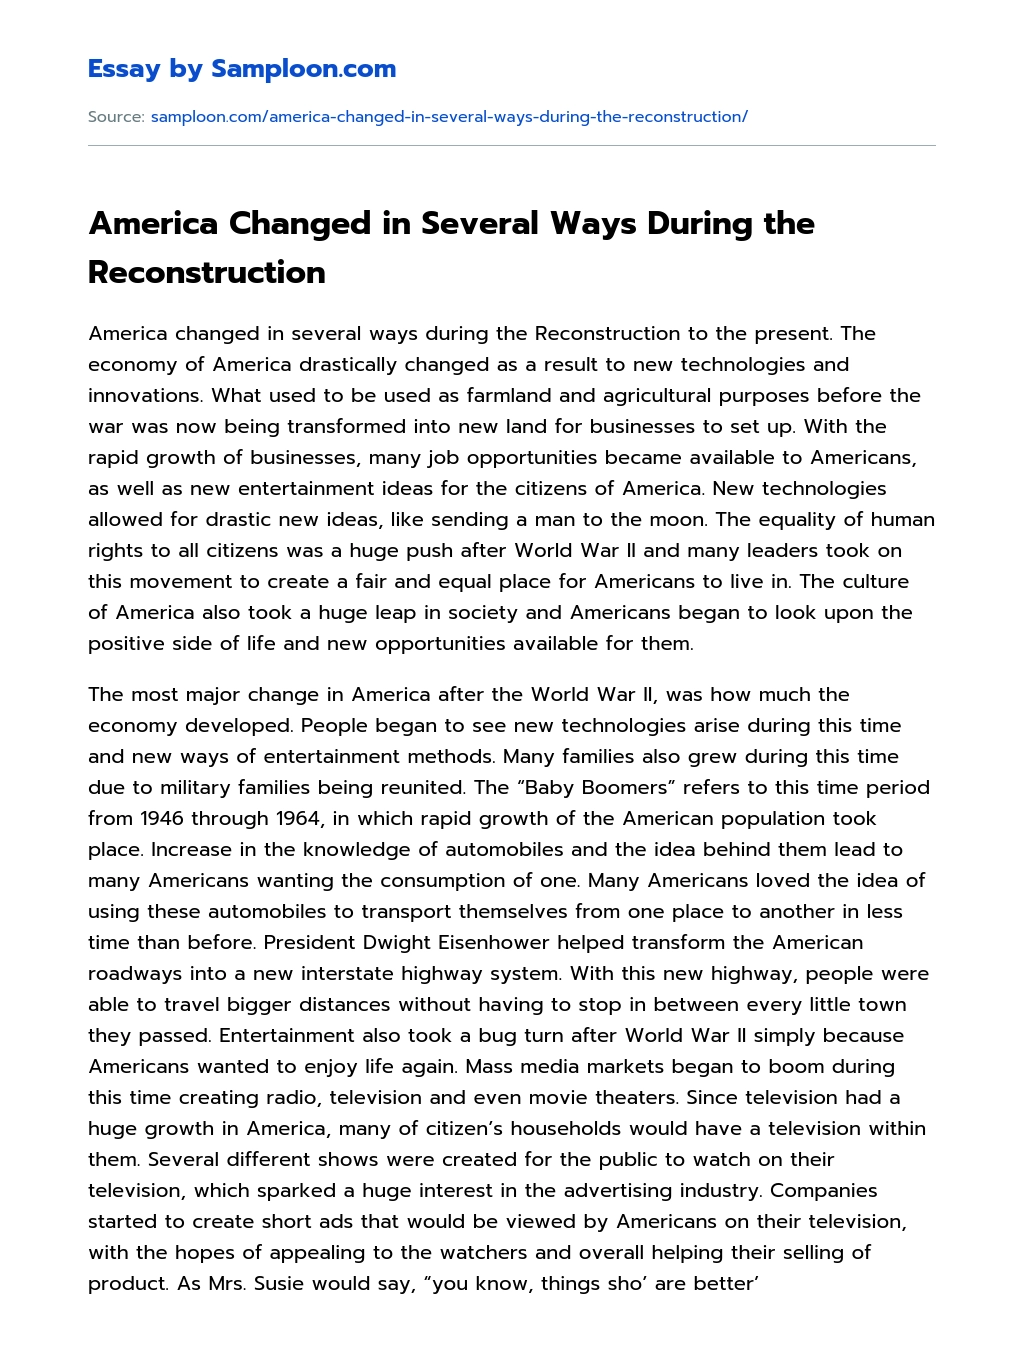 America Changed in Several Ways During the Reconstruction essay